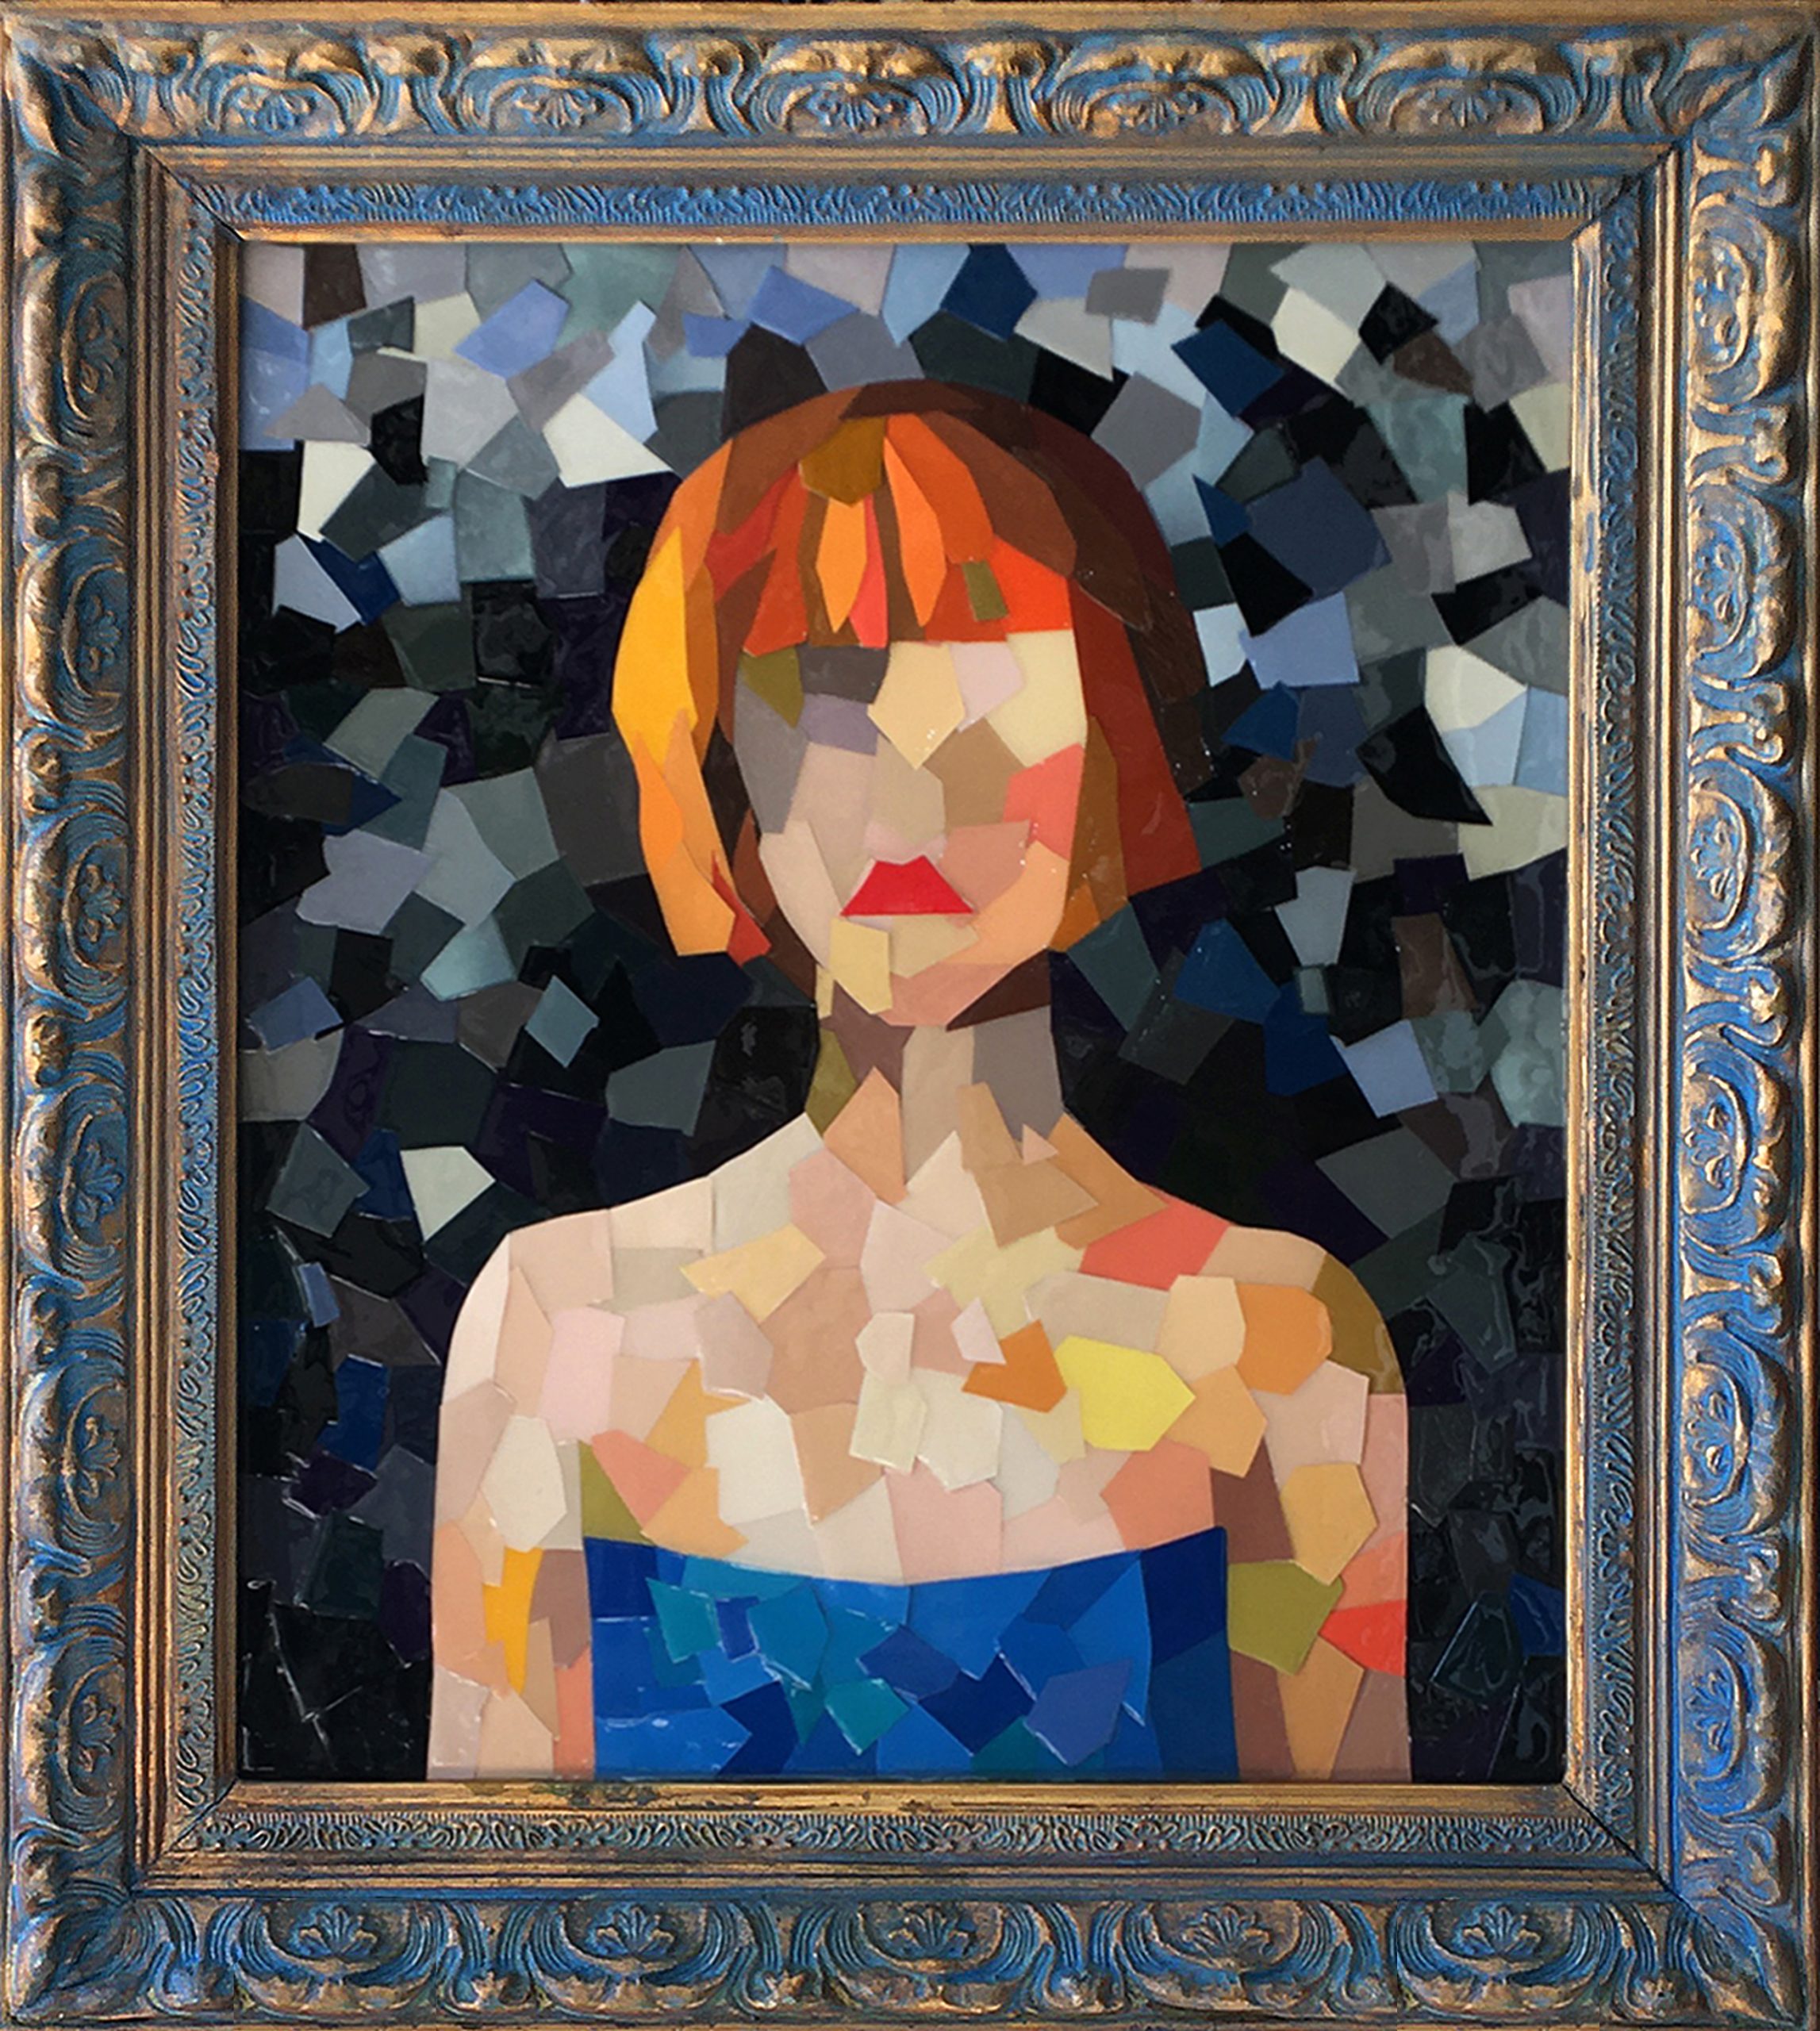 Modern art collage portrait created from recycled materials